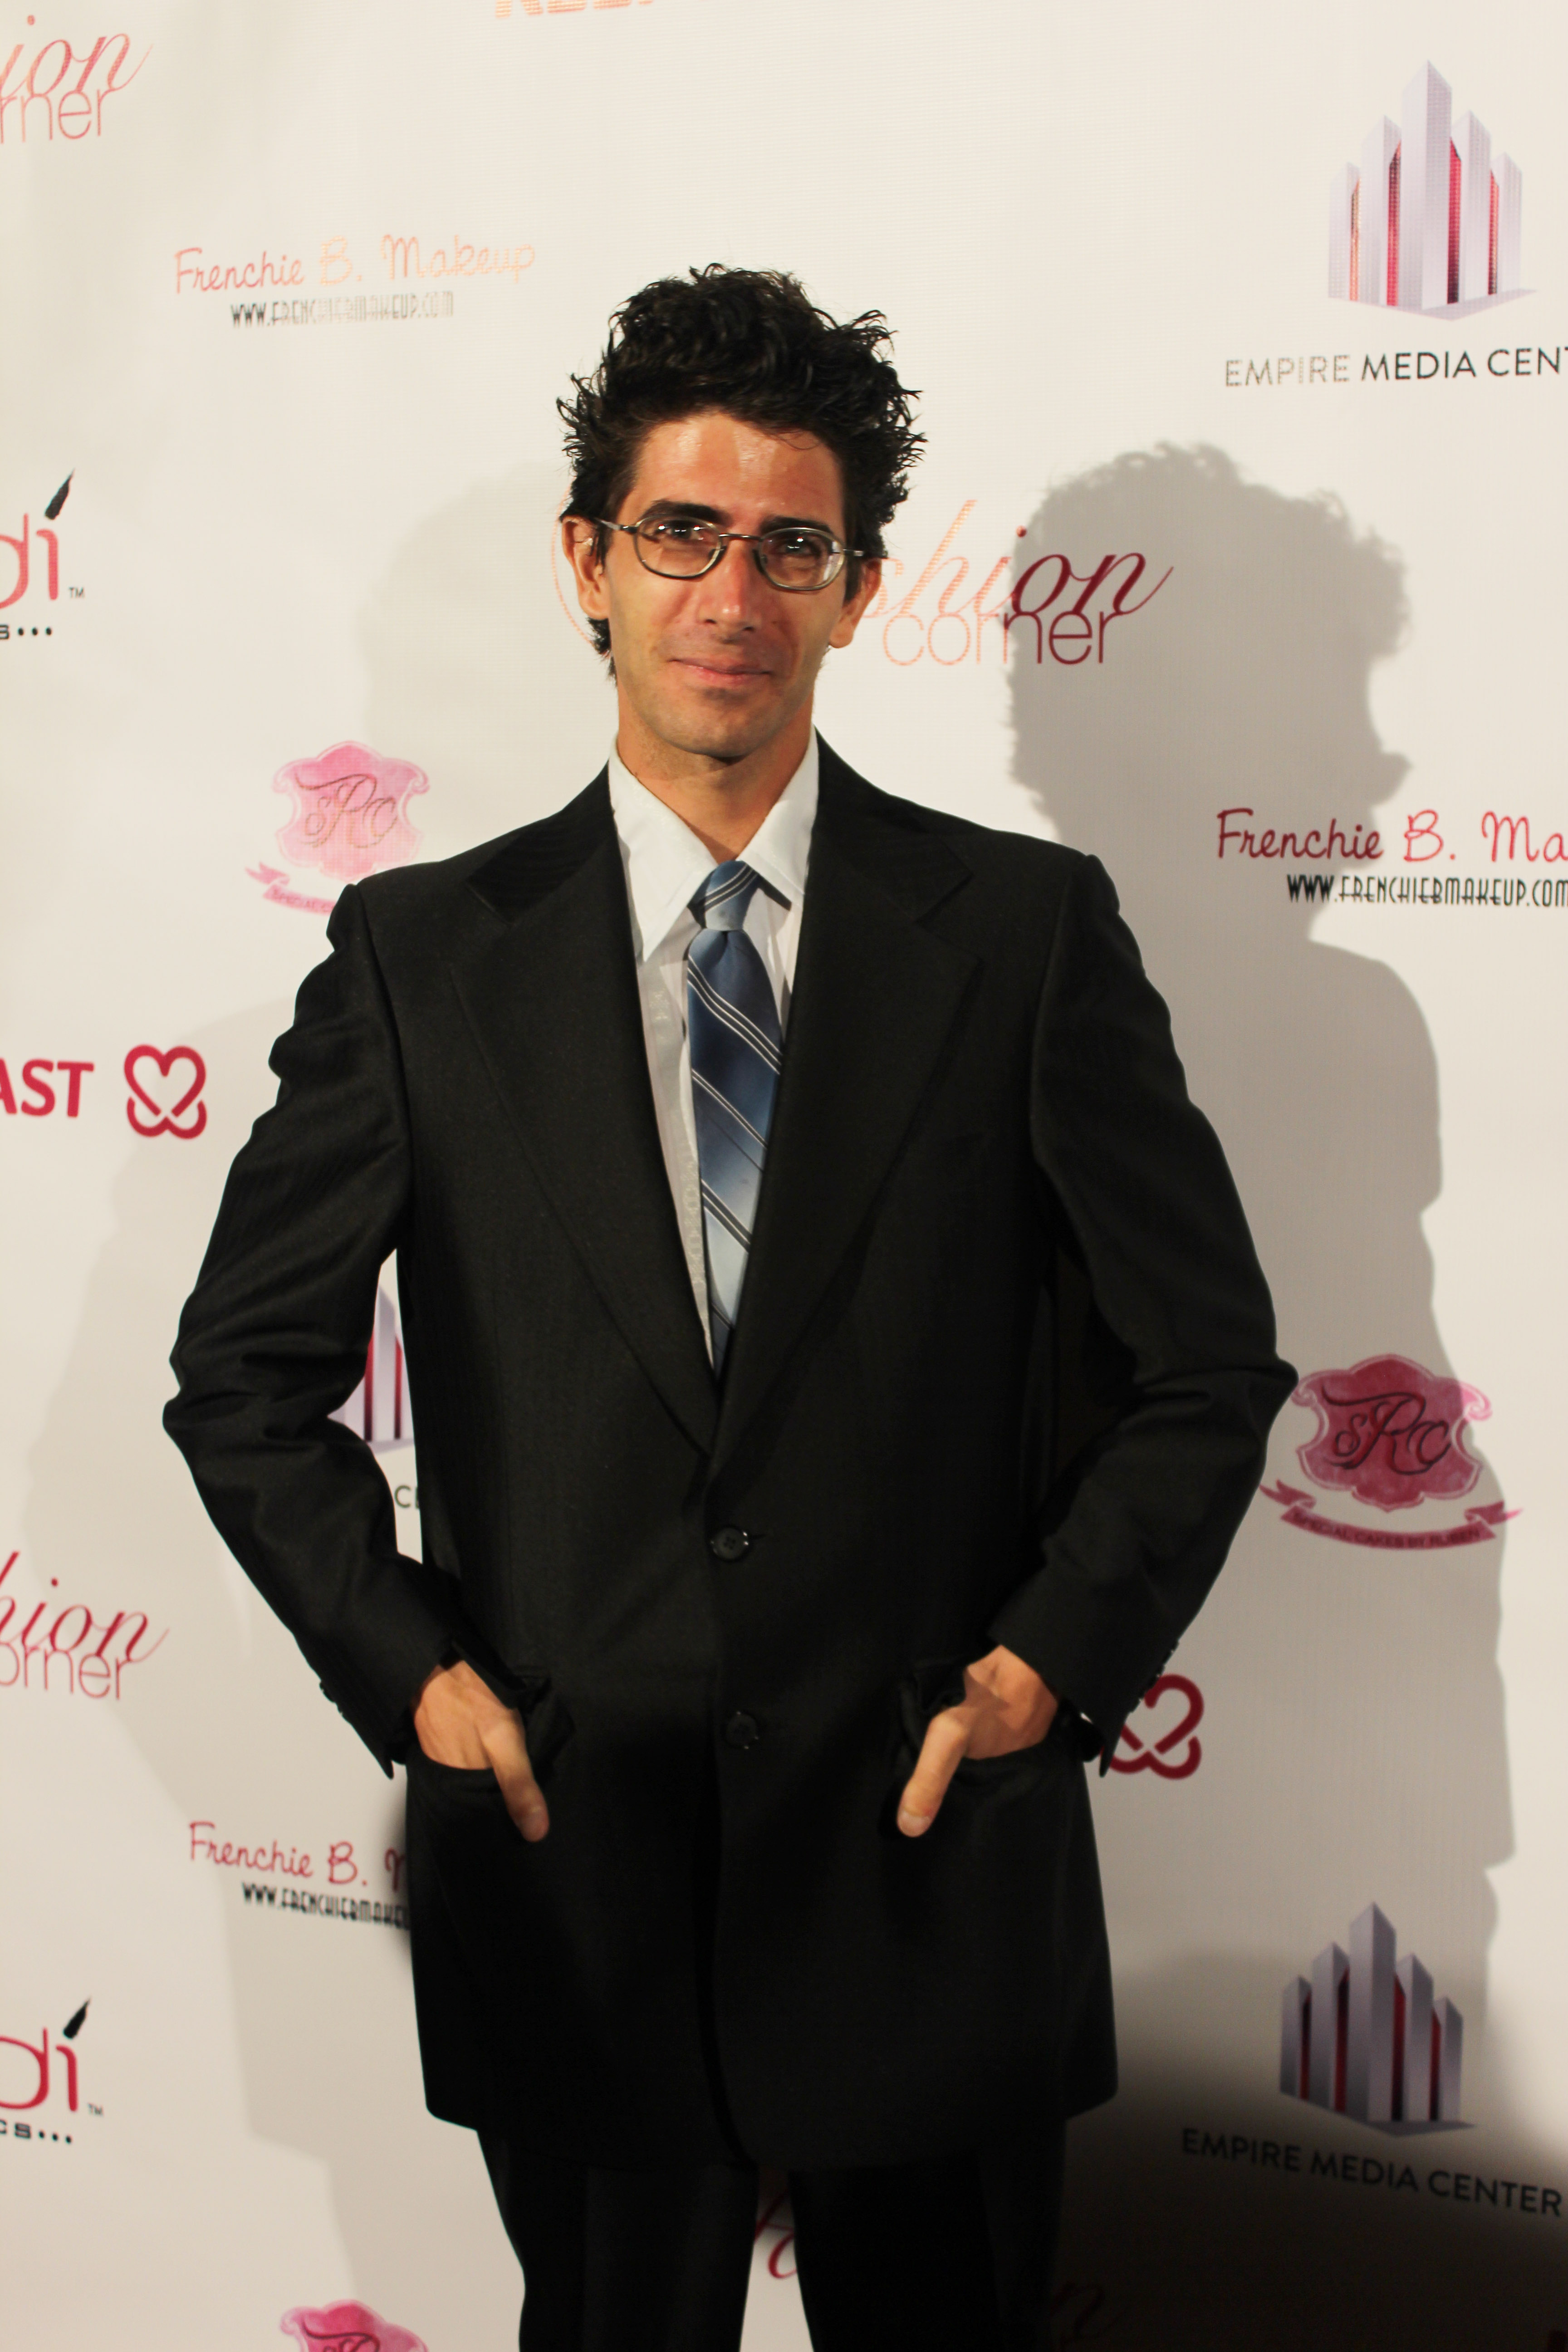 On the red carpet at the LA Fashion Corner event in Hollywood